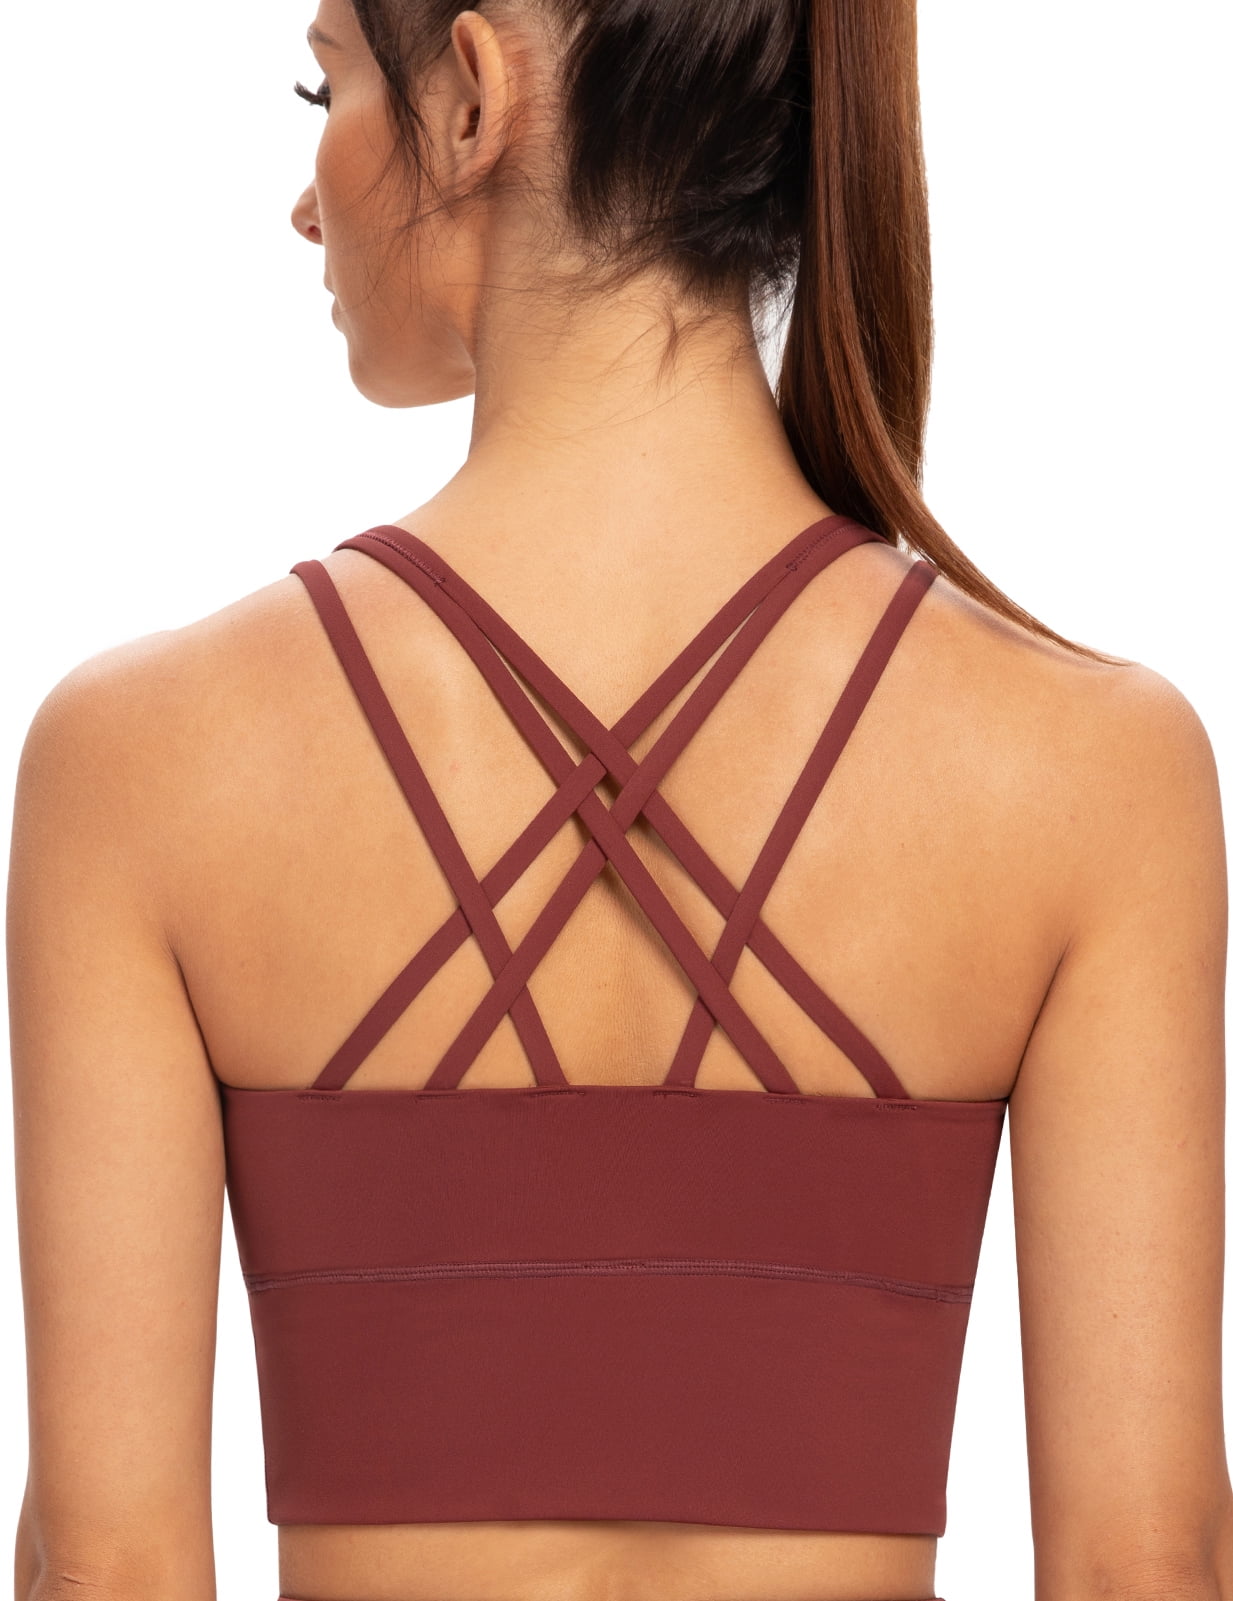  AGONVIN Women's Strappy Longline Yoga Sports Bra Padded  Wireless Crop Top Cami Tank Top Cabernet Red X-Small Plus : Clothing, Shoes  & Jewelry